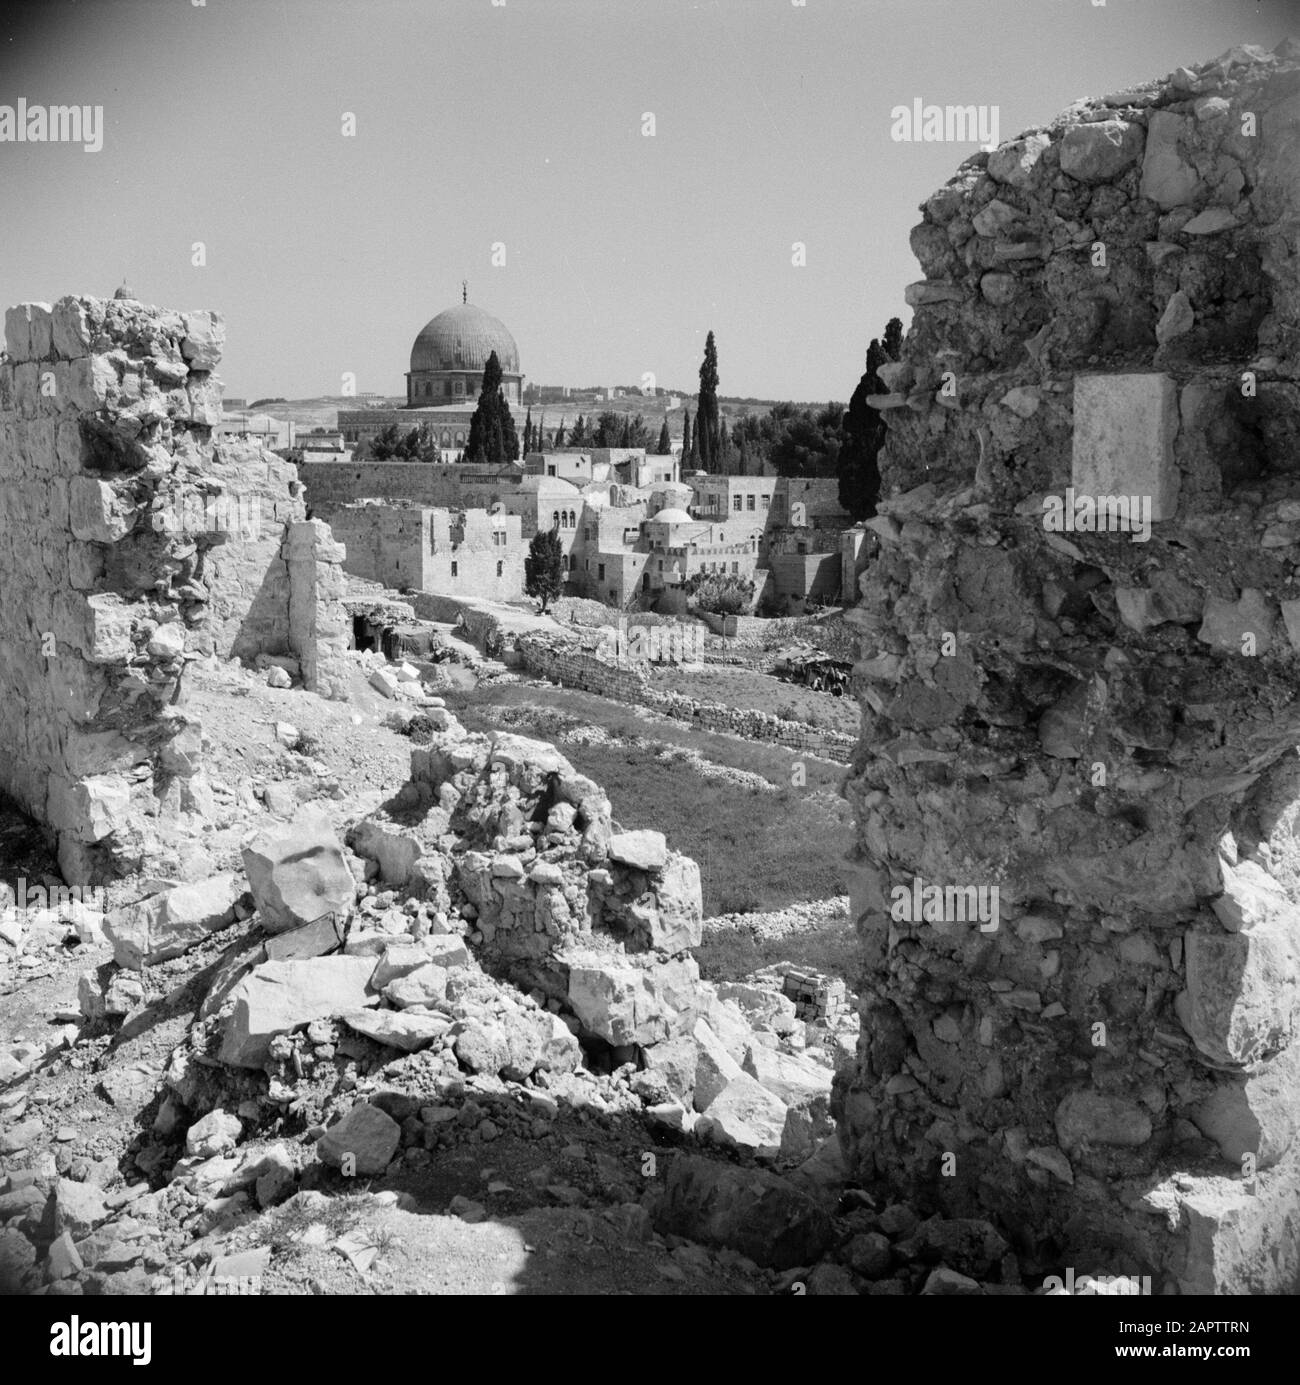 Middle East 1950-1955: Jerusalem  In Jewish Quarter. Al Aqsa mosque in the distance. Temple Square in the foreground Annotation: At the time of the recording, Jerusalem was in Jordan Date: 1950 Location: Israel, Jerusalem, Jordan Keywords: mosques, squares Stock Photo